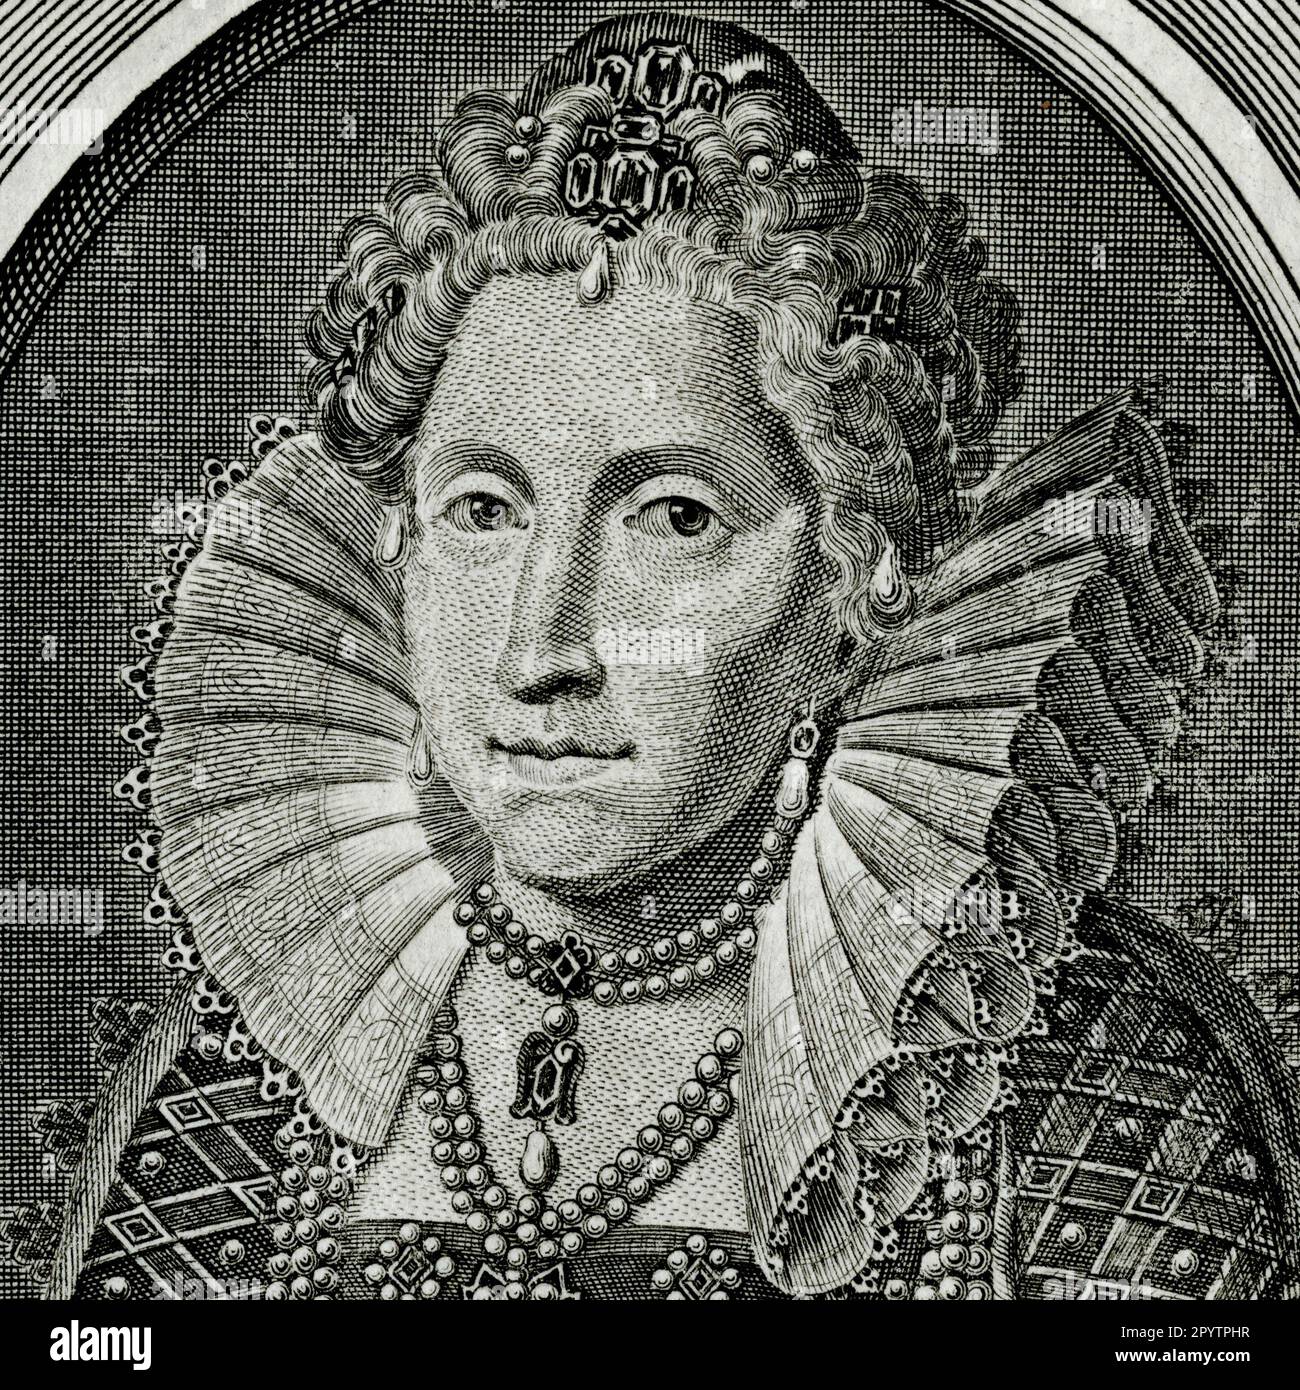 Queen Elizabeth I of England (1533 - 1603). Square detail of engraving created in the 1700s by Michael van der Gucht (1660-1725), after a portrait by Sir Anthony More (c. 1520 - c. 1576). Stock Photo